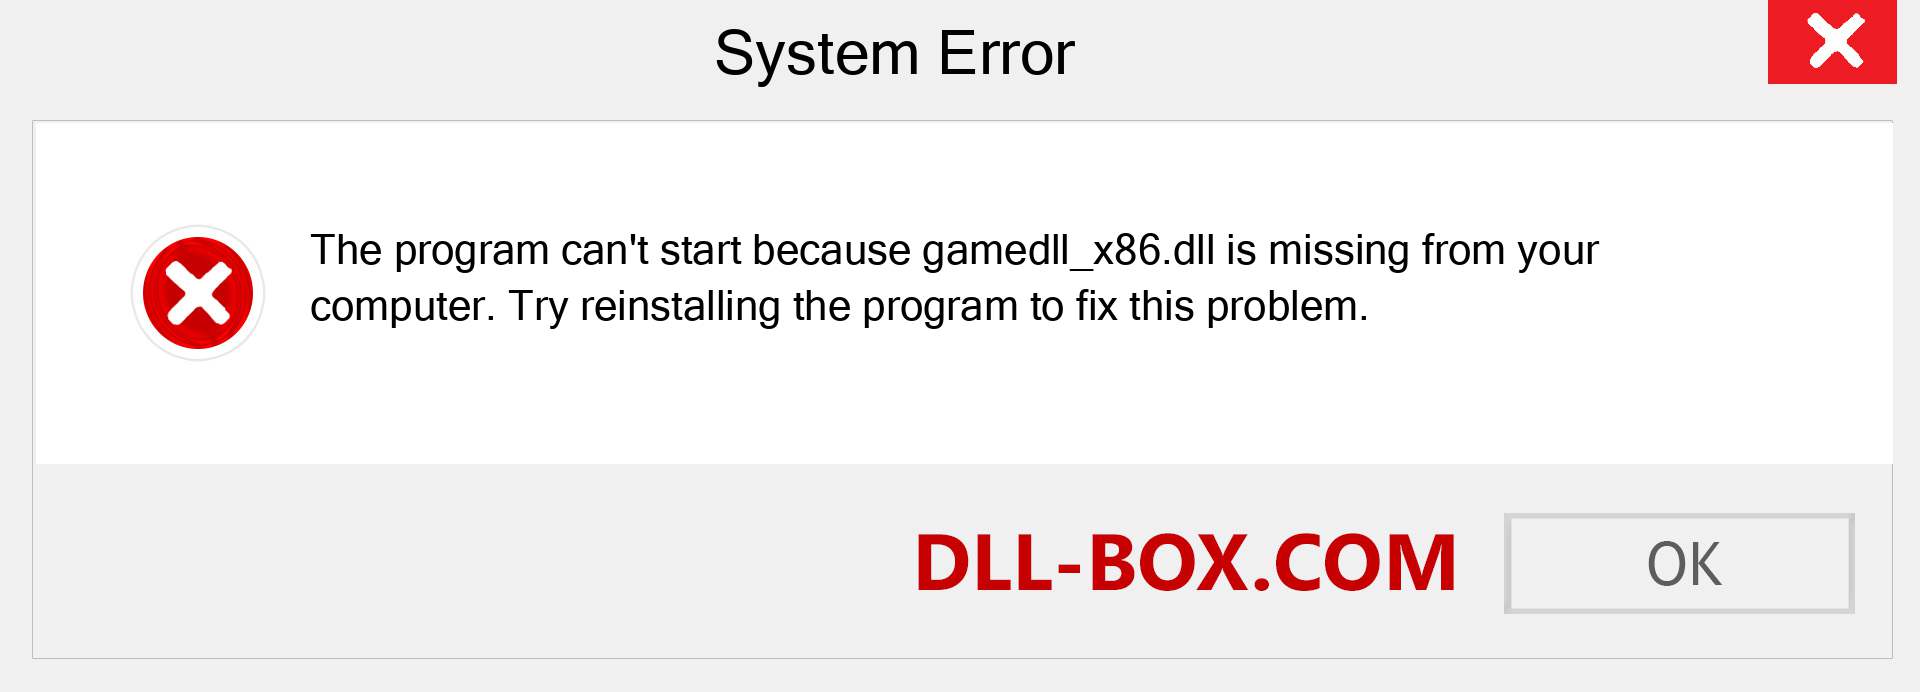  gamedll_x86.dll file is missing?. Download for Windows 7, 8, 10 - Fix  gamedll_x86 dll Missing Error on Windows, photos, images